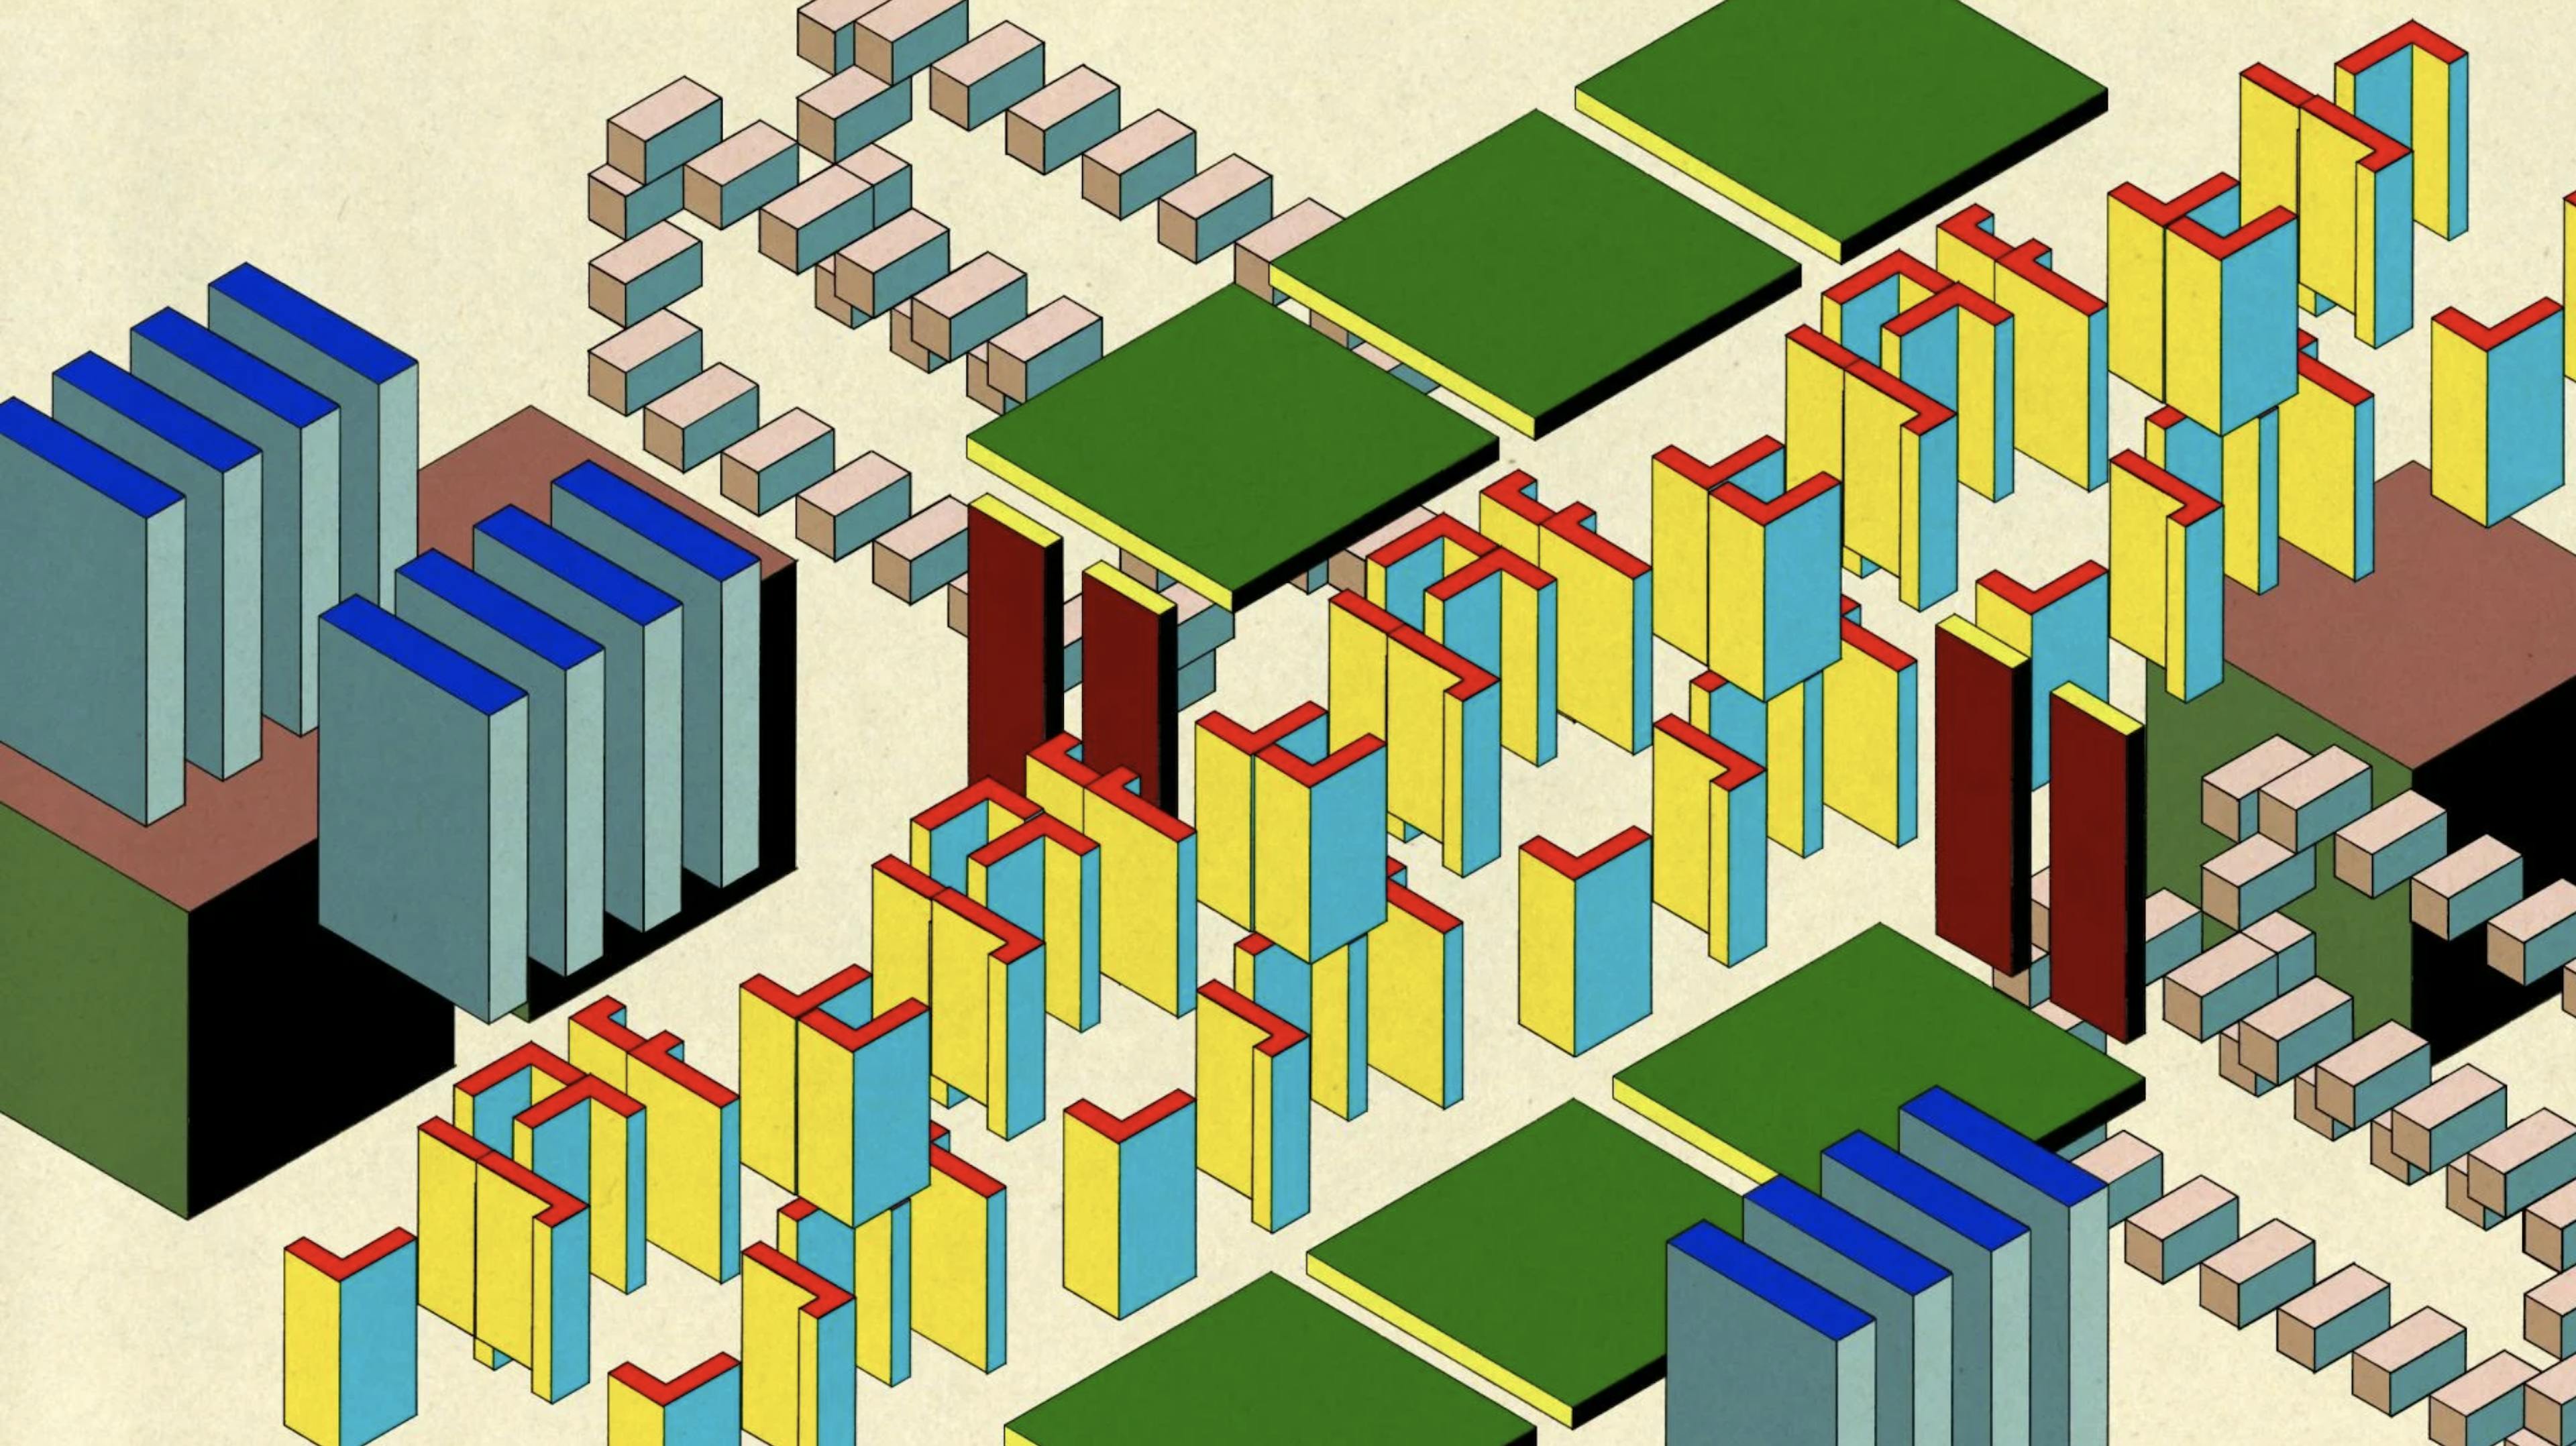 An isometric view of colourful rectangular prisms arranged in abstract patterns.